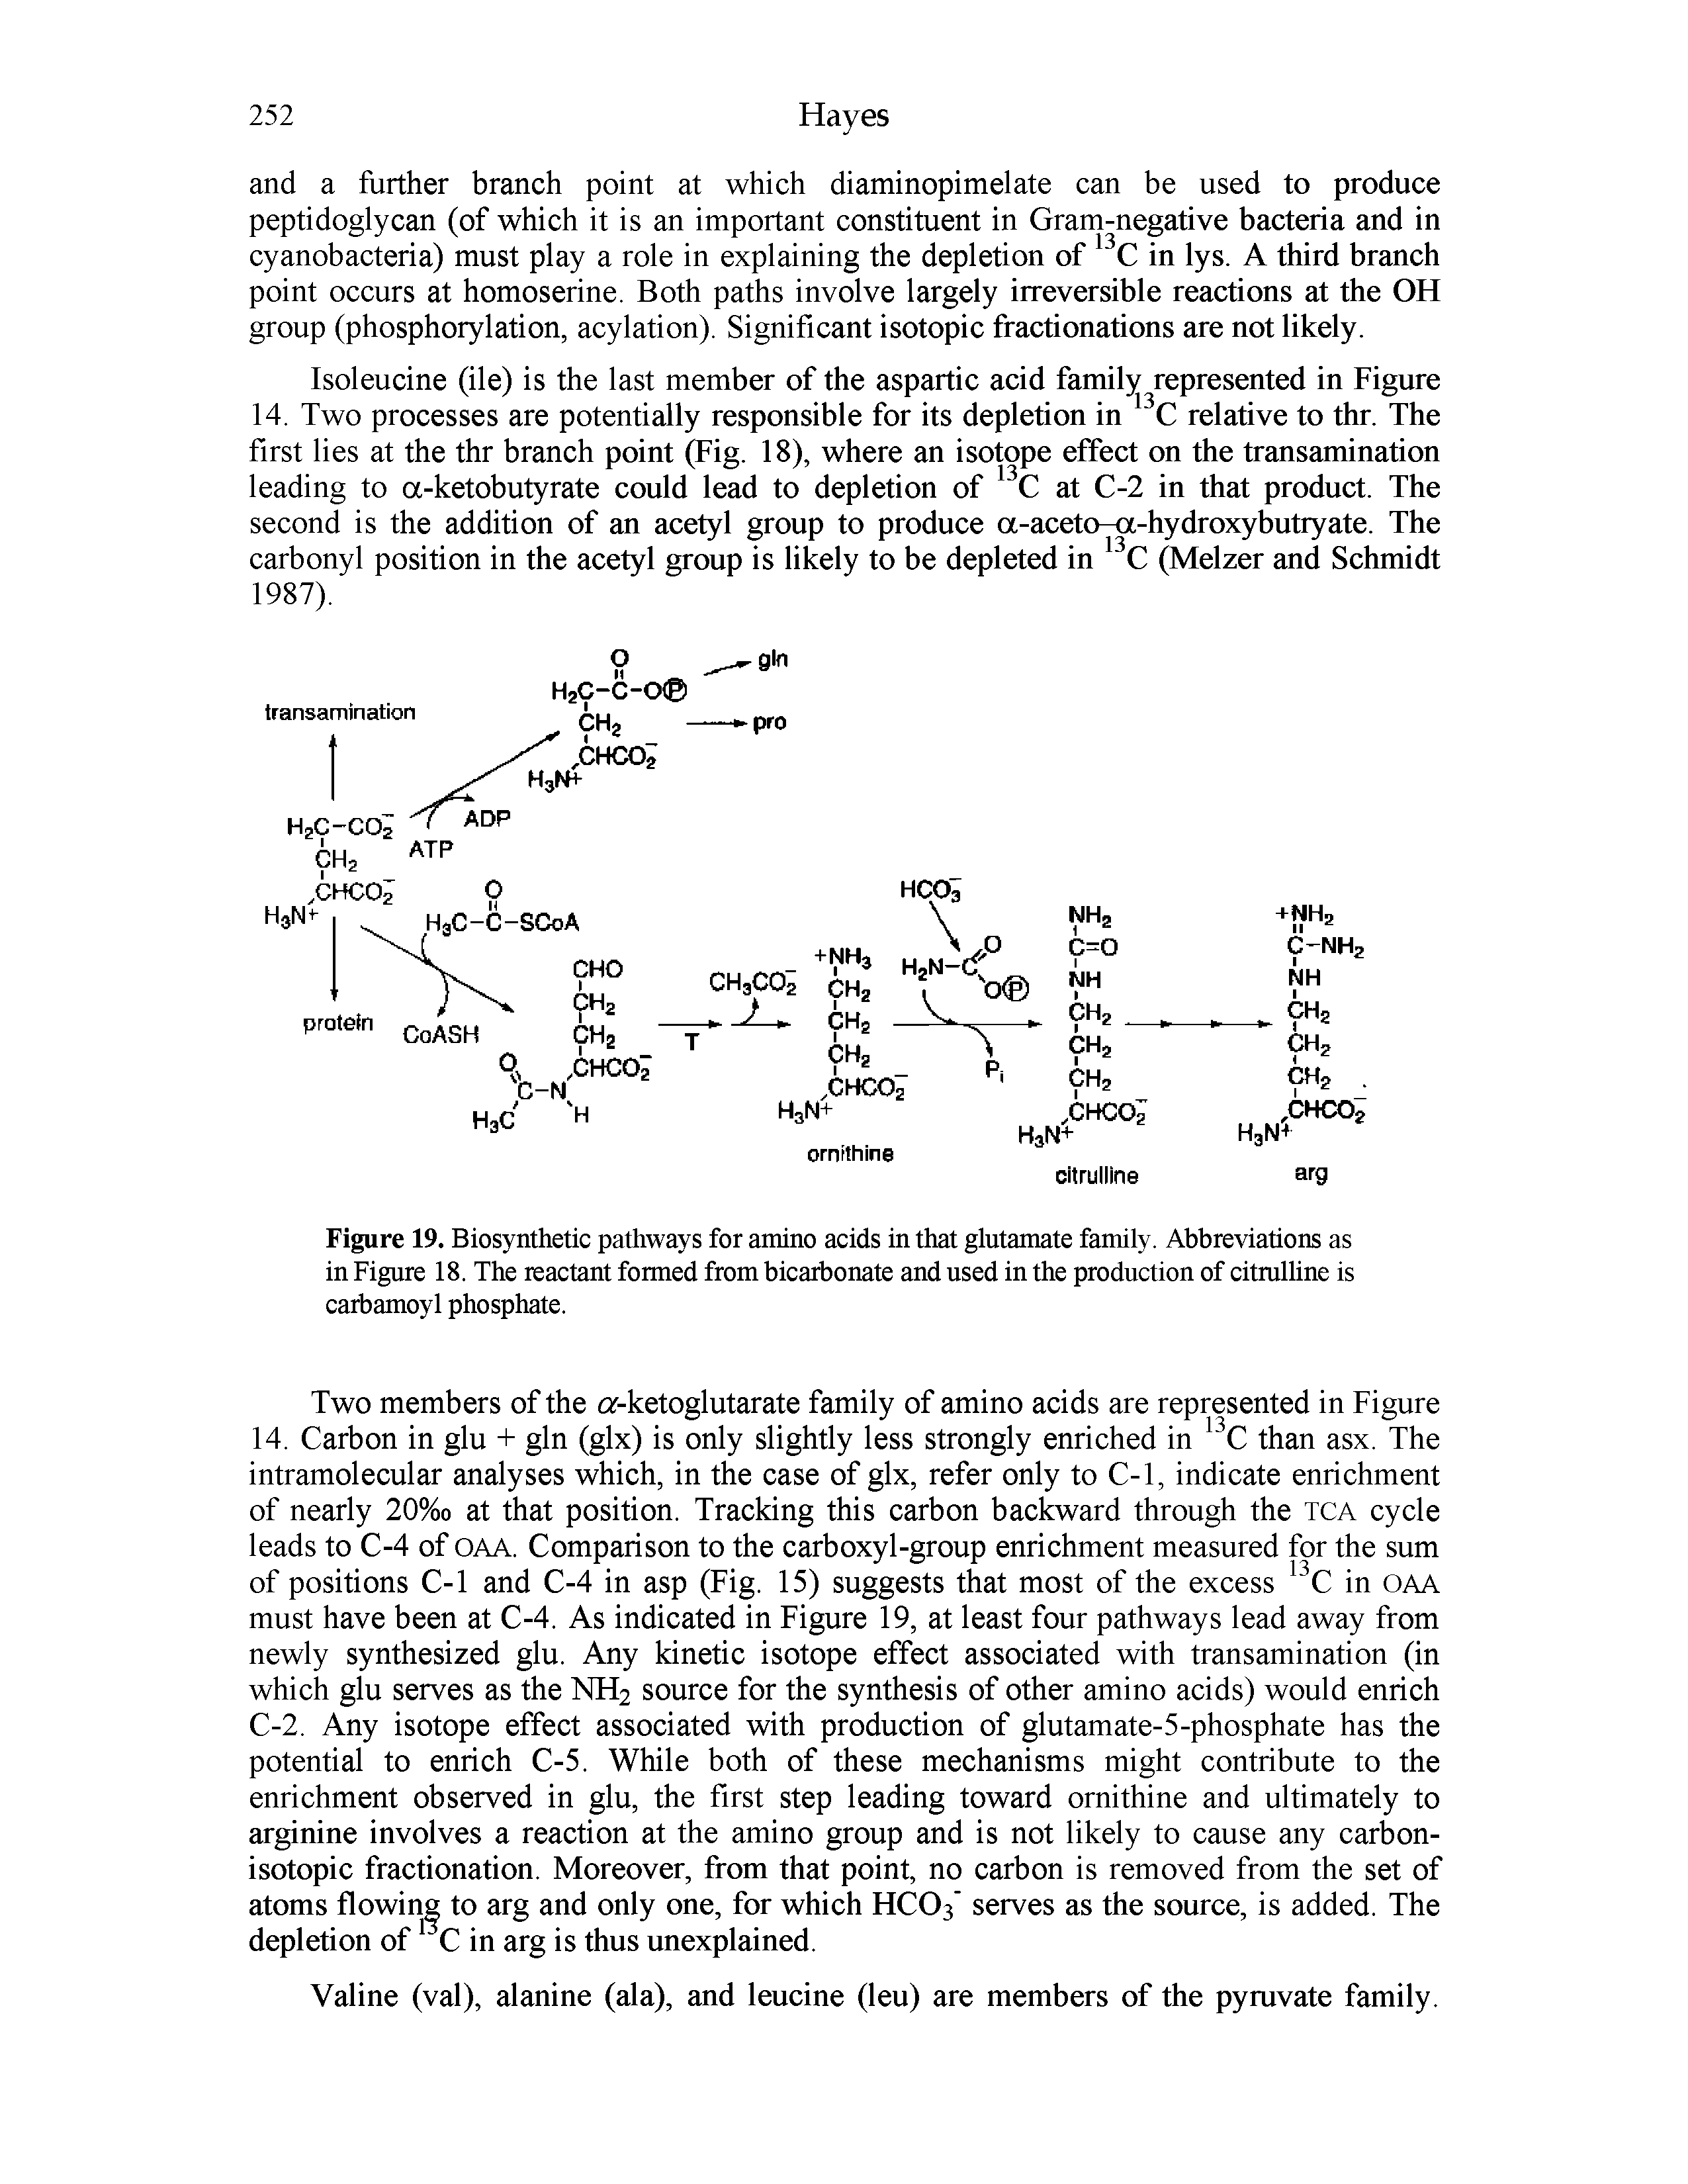 Figure 19. Biosynthetic pathways for amino acids in that glutamate family. Abbreviations as in Figure 18. The reactant formed from bicarbonate and used in the production of citmlline is carbamoyl phosphate.